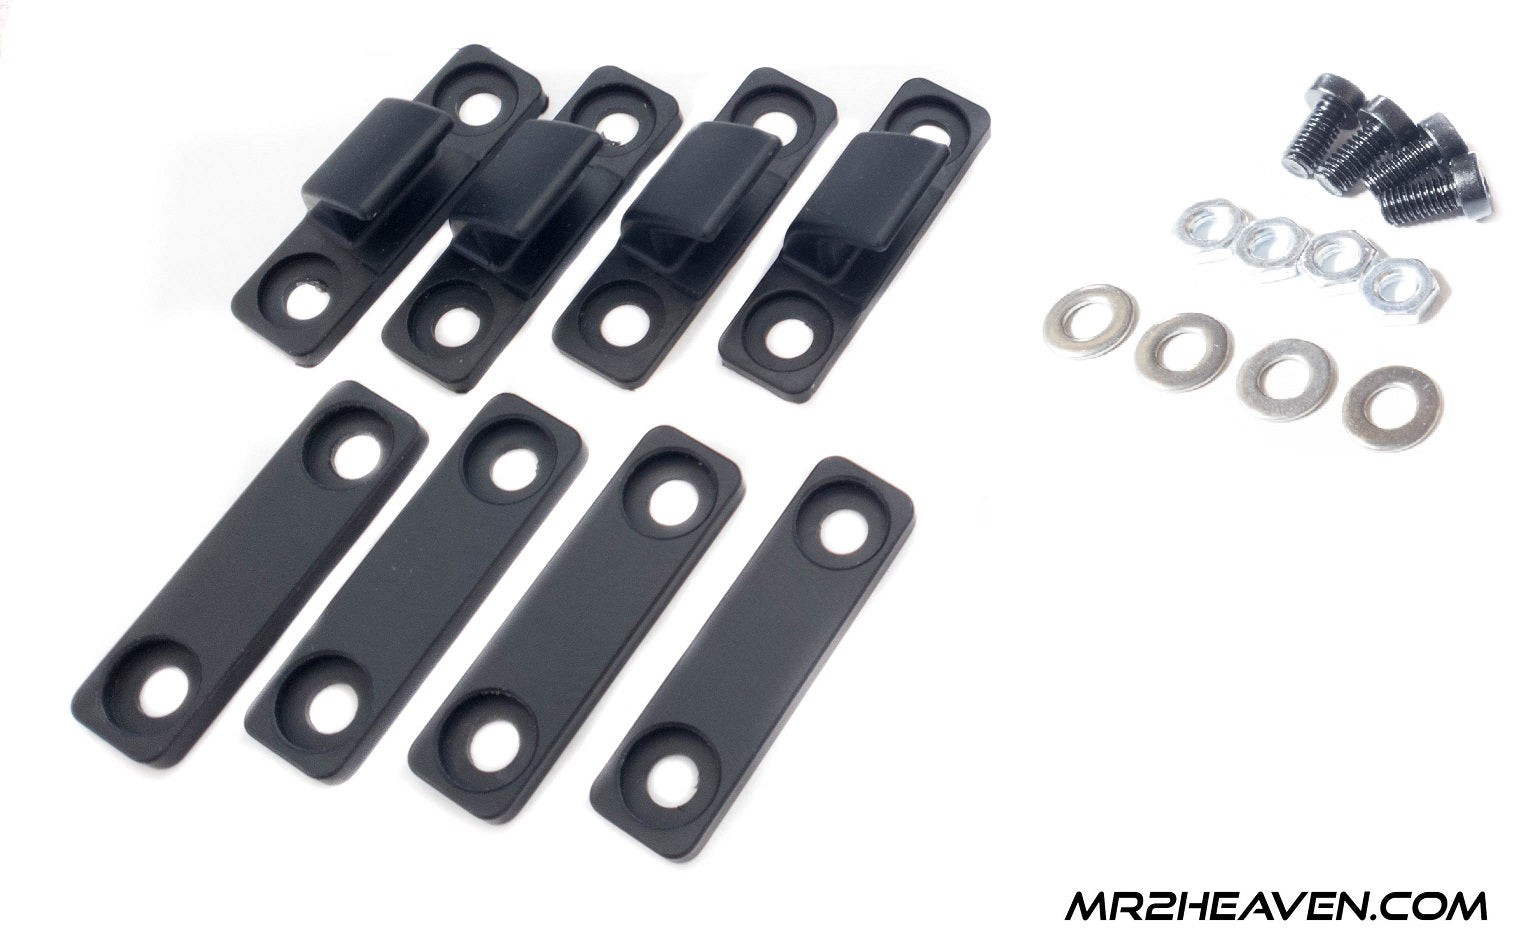 MR2Heaven - CNCed Removable T-Top SunShade Replacement Mounting Clip Kit